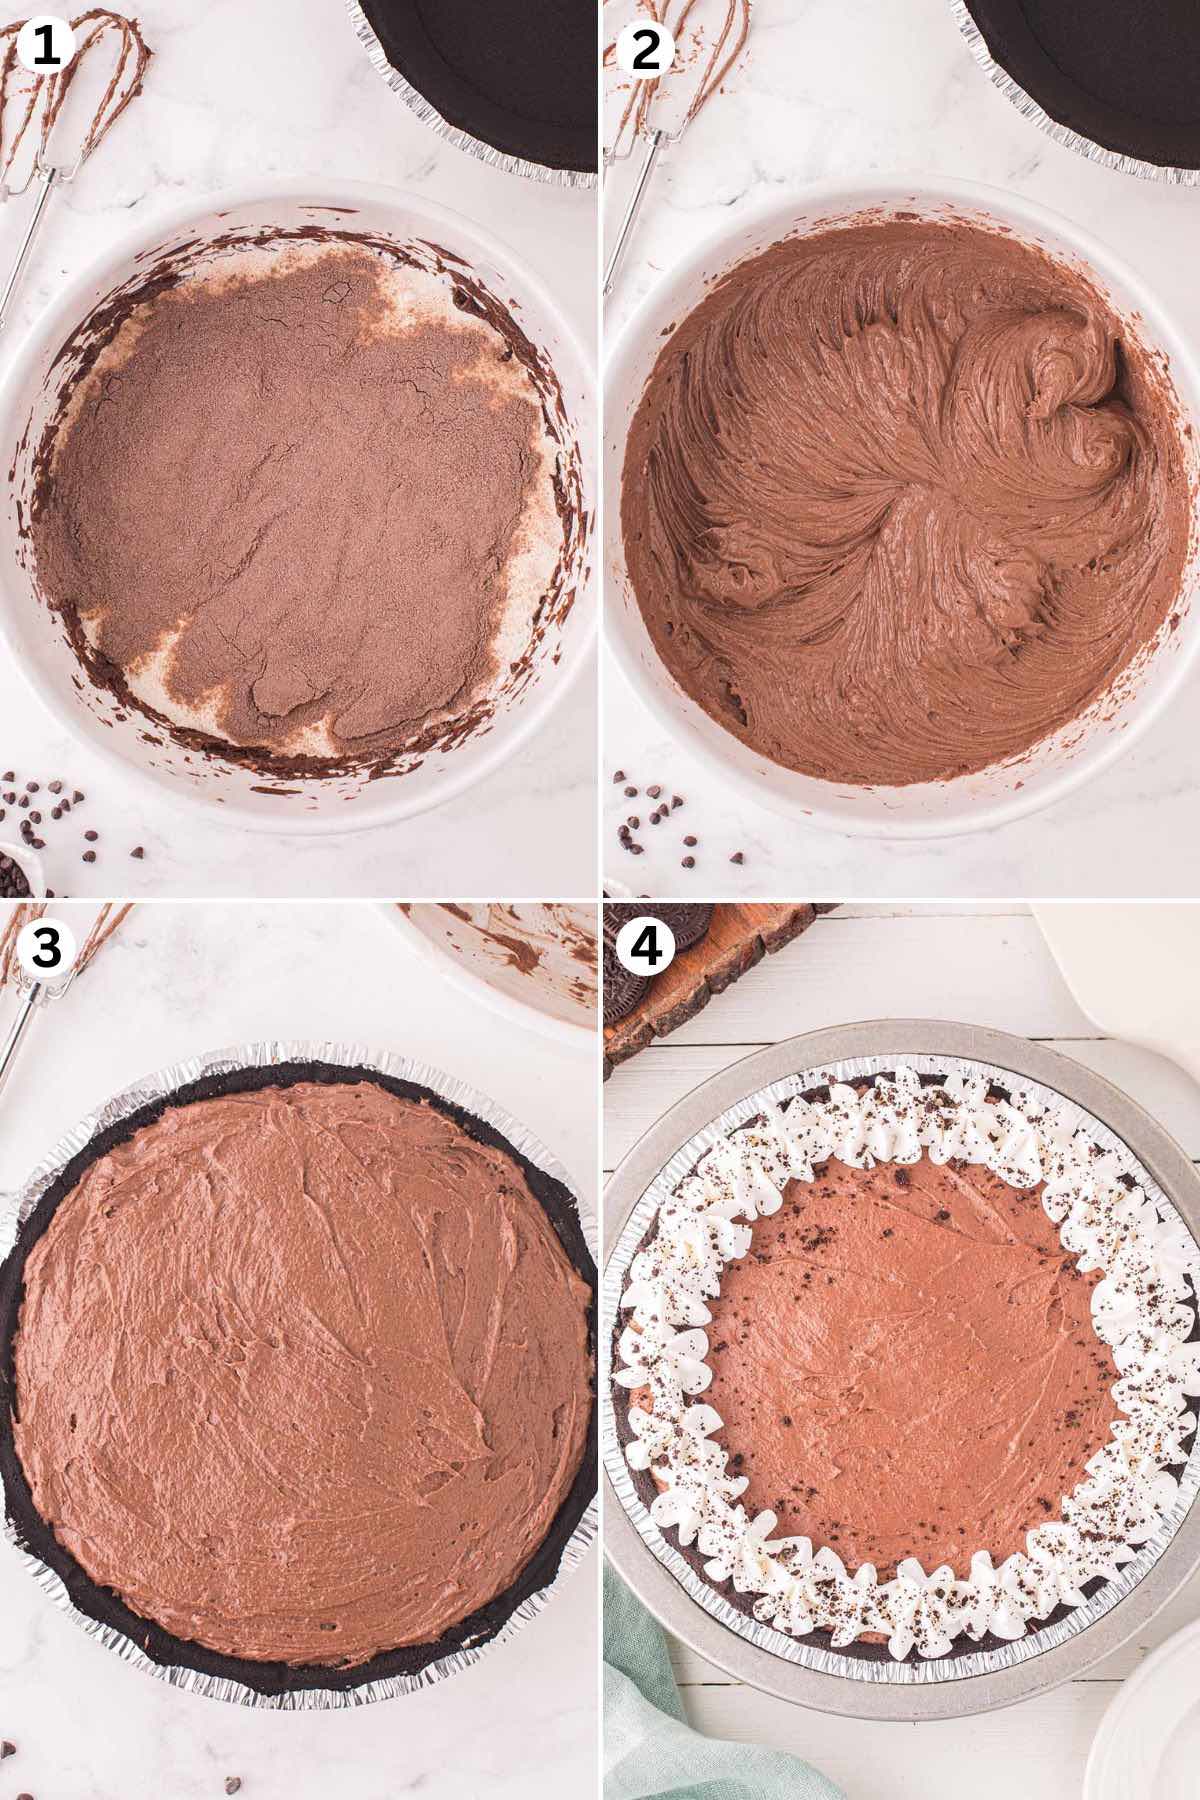 making the nutella mixture. spread the mixture into the Oreo pie crust. decorate and pipe whipped topping around the edge and sprinkle with mini chocolate chips.